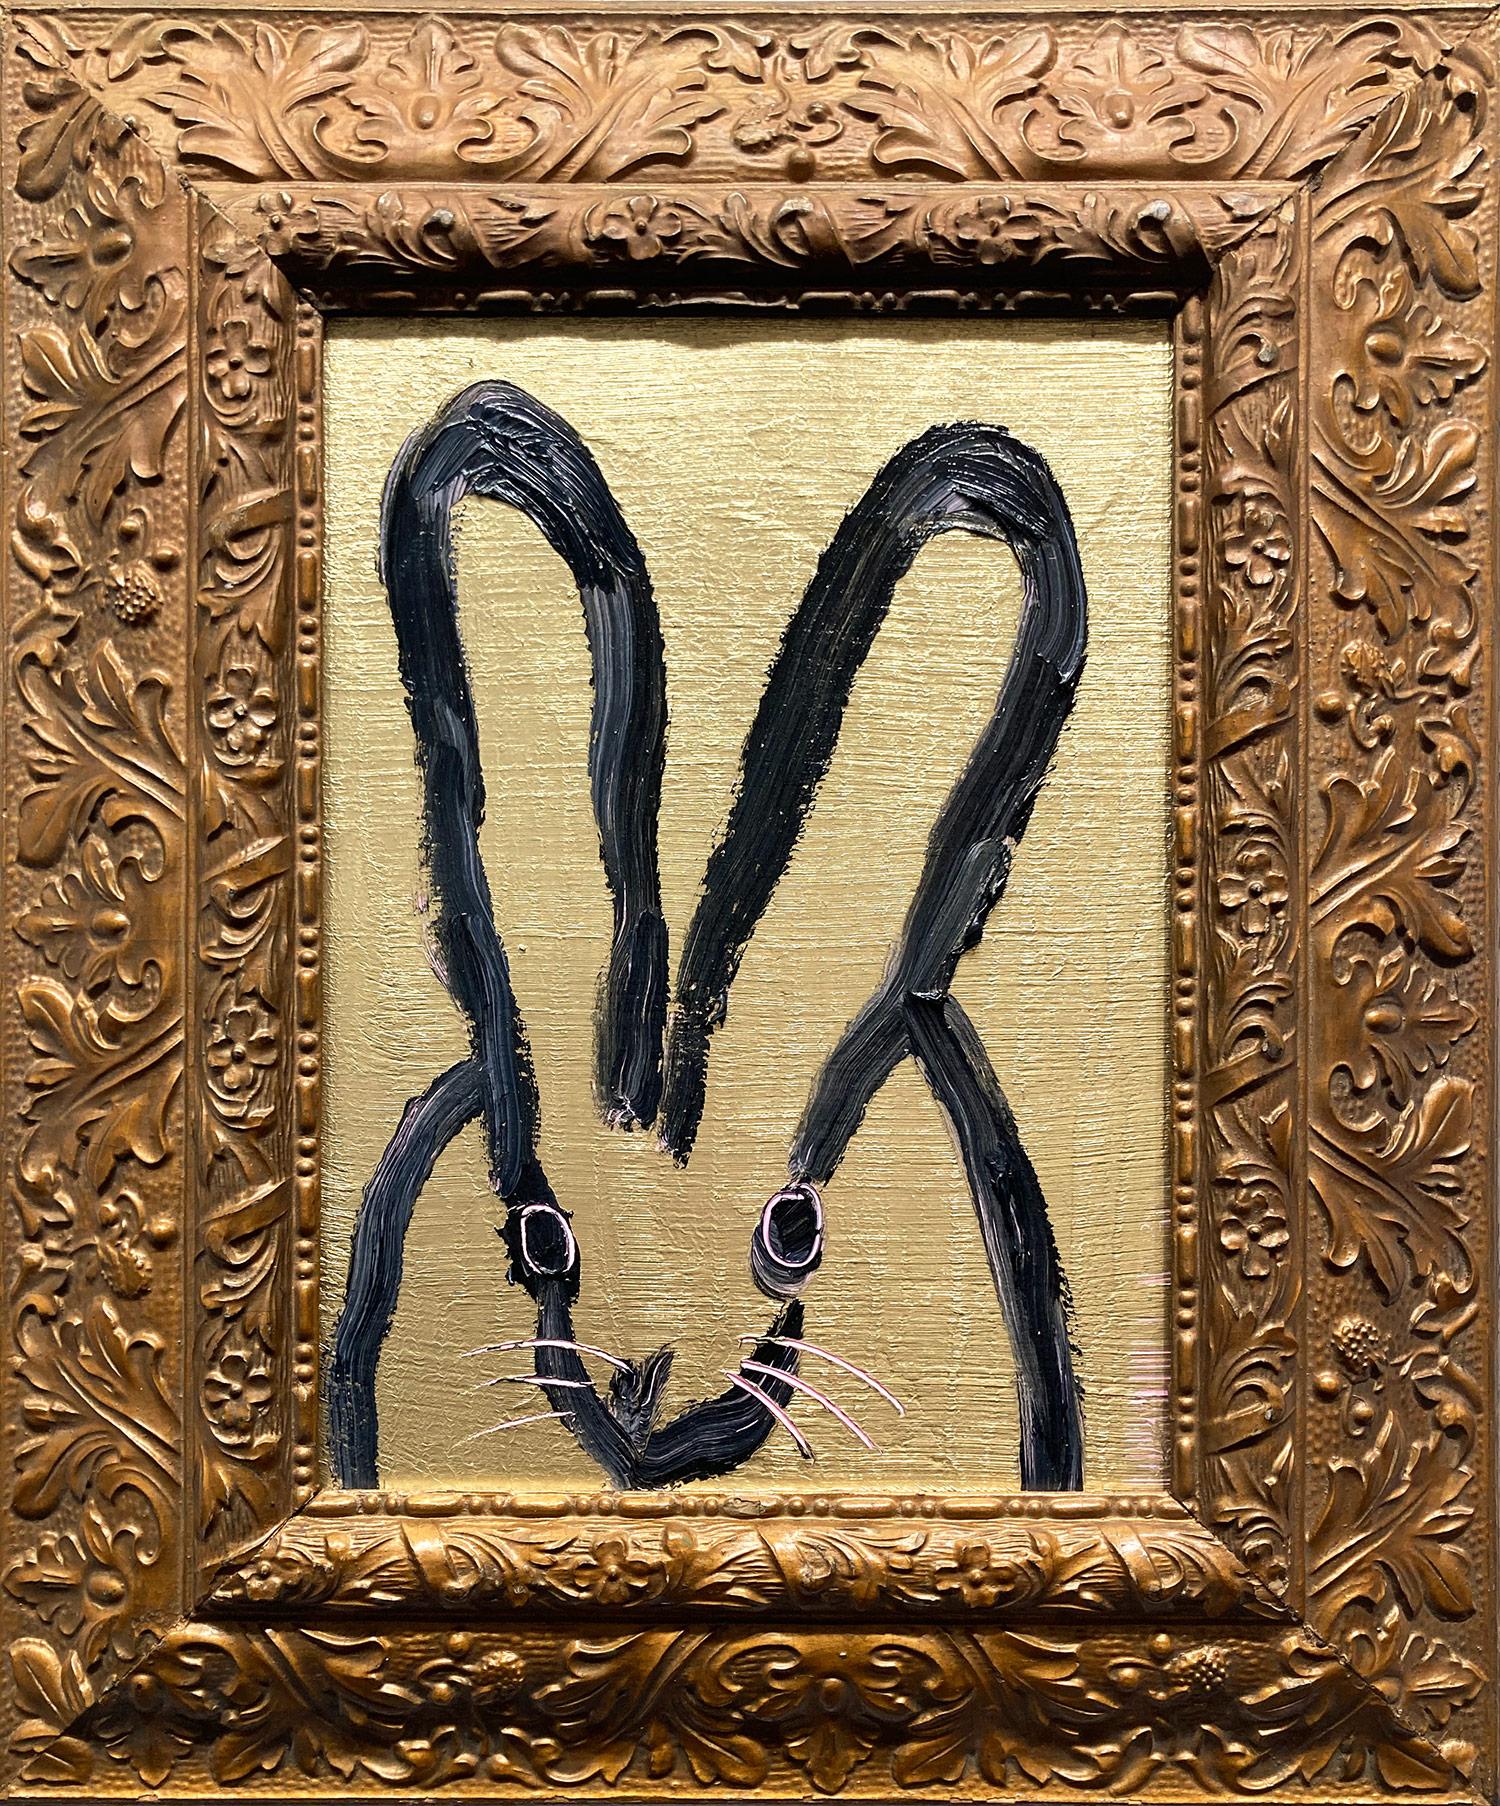 Hunt Slonem Animal Painting - "Stance" Black Outlined Bunny on Gold Background Oil Painting on Wood Panel